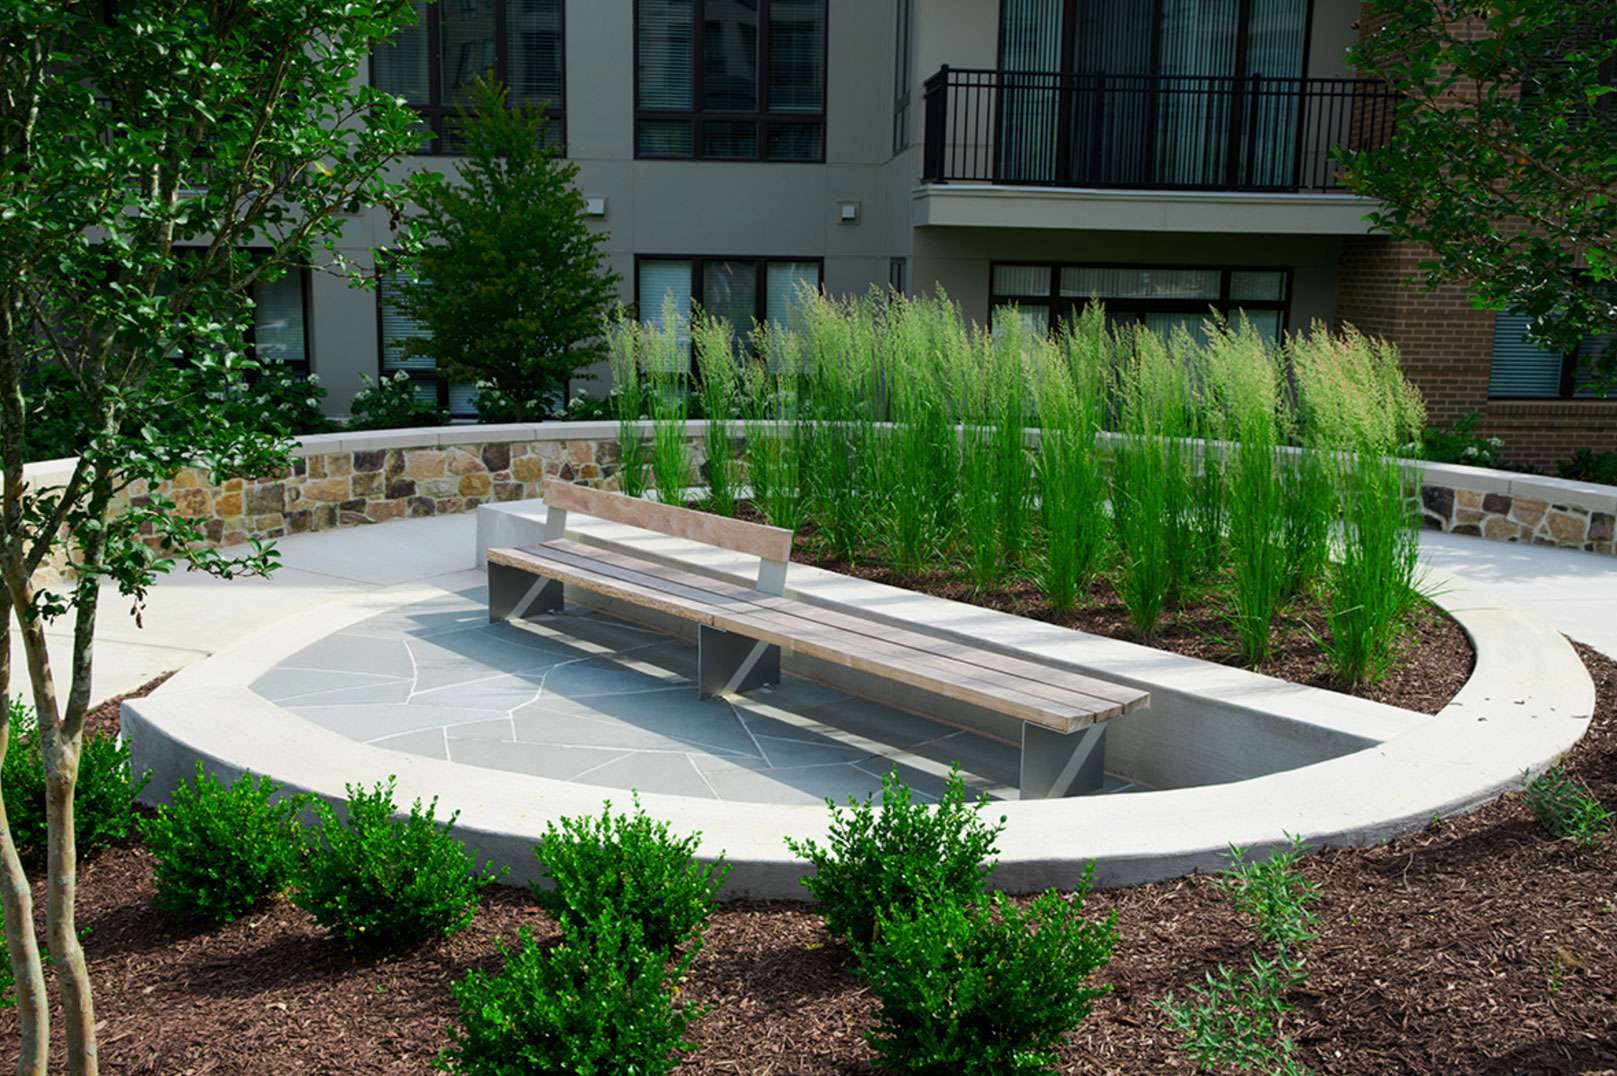 Corporate Campus Landscaping: 9 Amenities for DC Metro Area Businesses